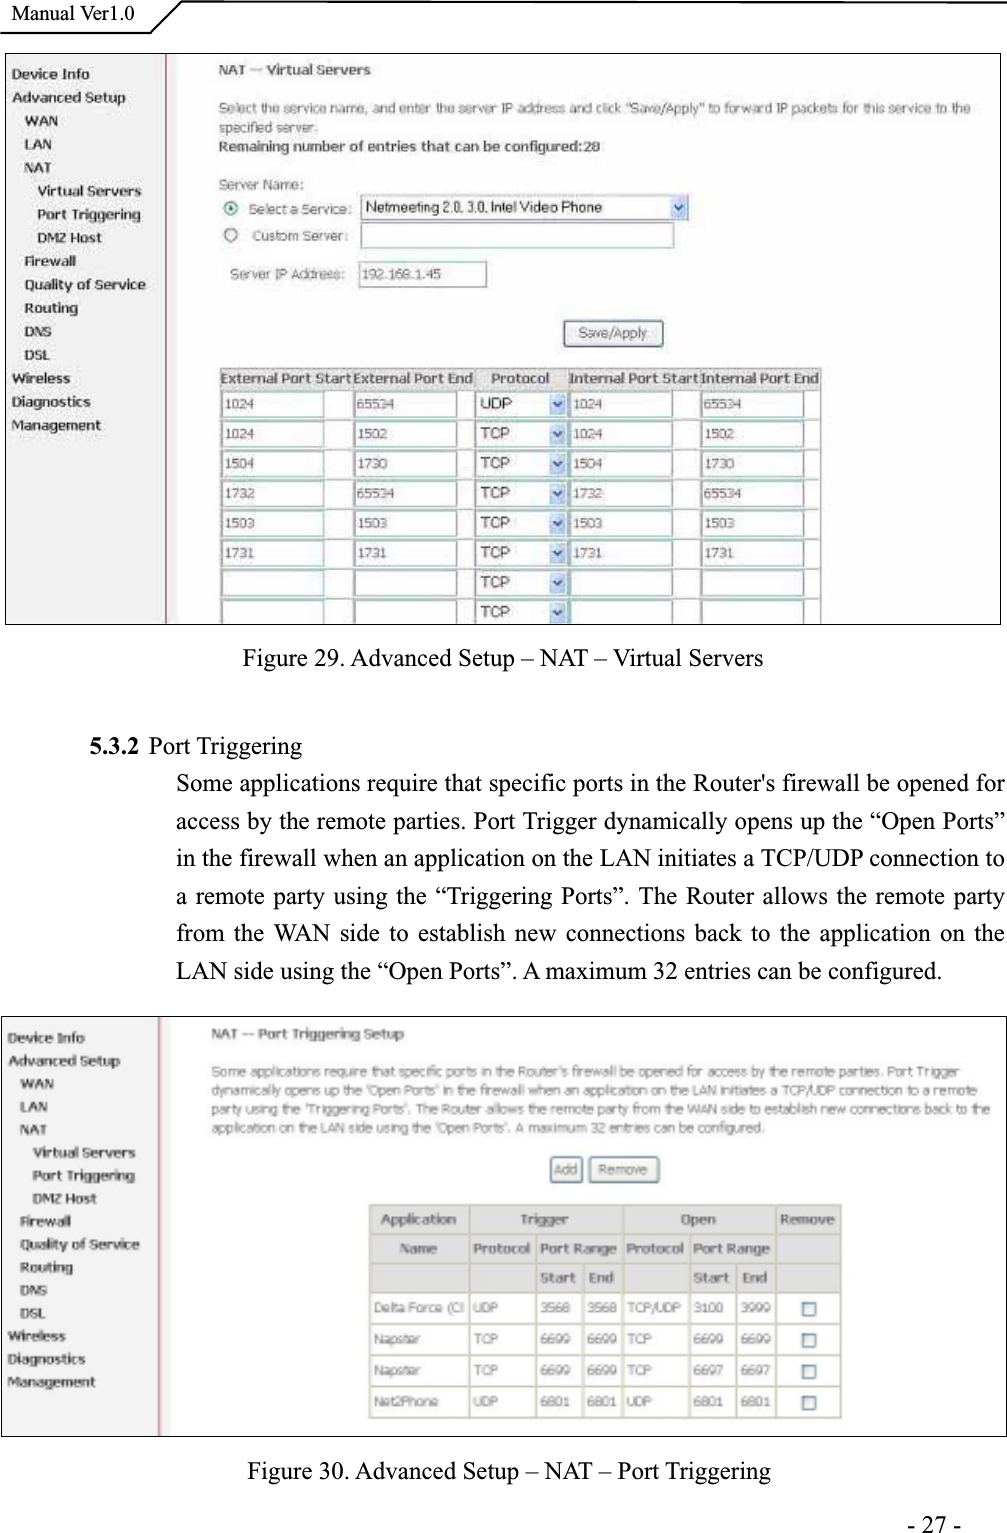  Manual Ver1.0Figure 29. Advanced Setup – NAT – Virtual Servers 5.3.2 Port TriggeringSome applications require that specific ports in the Router&apos;s firewall be opened foraccess by the remote parties. Port Trigger dynamically opens up the “Open Ports” in the firewall when an application on the LAN initiates a TCP/UDP connection to a remote party using the “Triggering Ports”. The Router allows the remote party from the WAN side to establish new connections back to the application on theLAN side using the “Open Ports”. A maximum 32 entries can be configured. Figure 30. Advanced Setup – NAT – Port Triggering                                                                     -27-